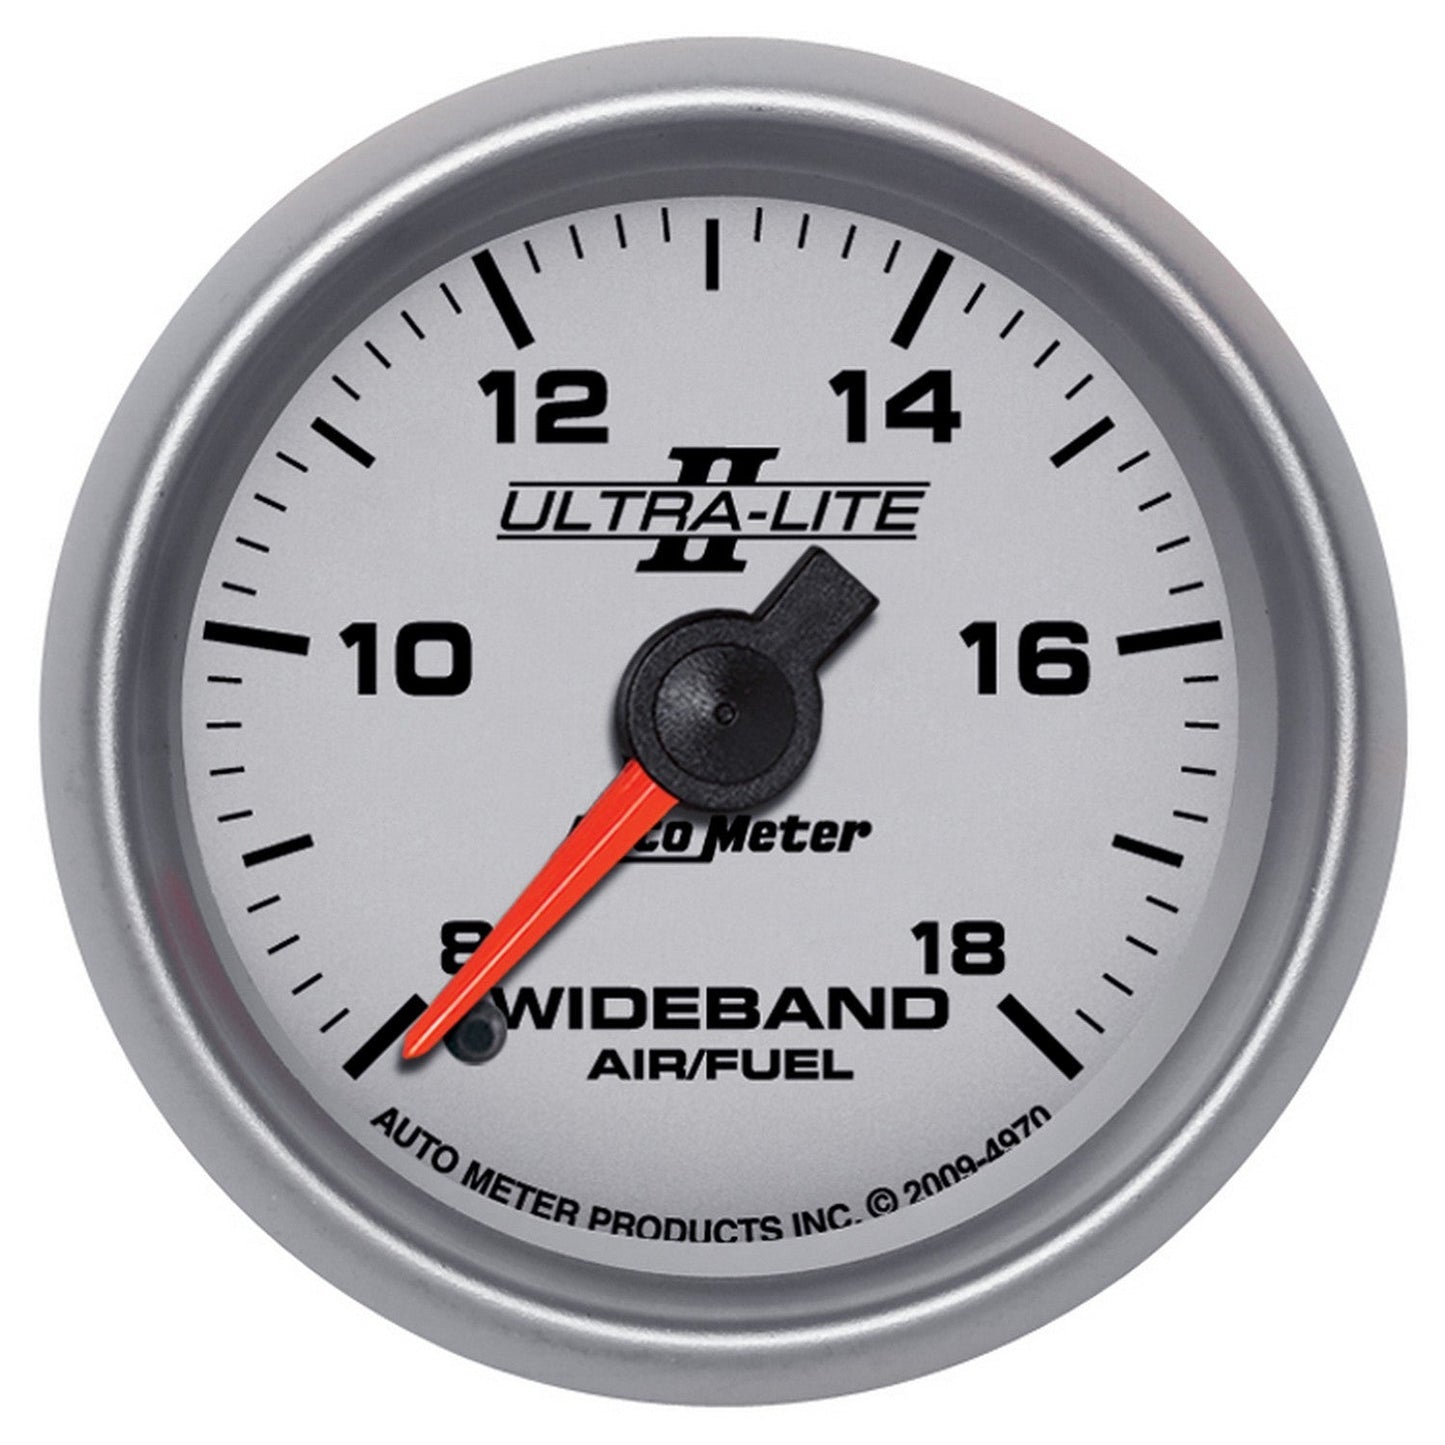 AutoMeter - 2-1/16" WIDEBAND AIR/FUEL RATIO, ANALOG, 8:1-18:1 AFR, ULTRA-LITE II (4970)